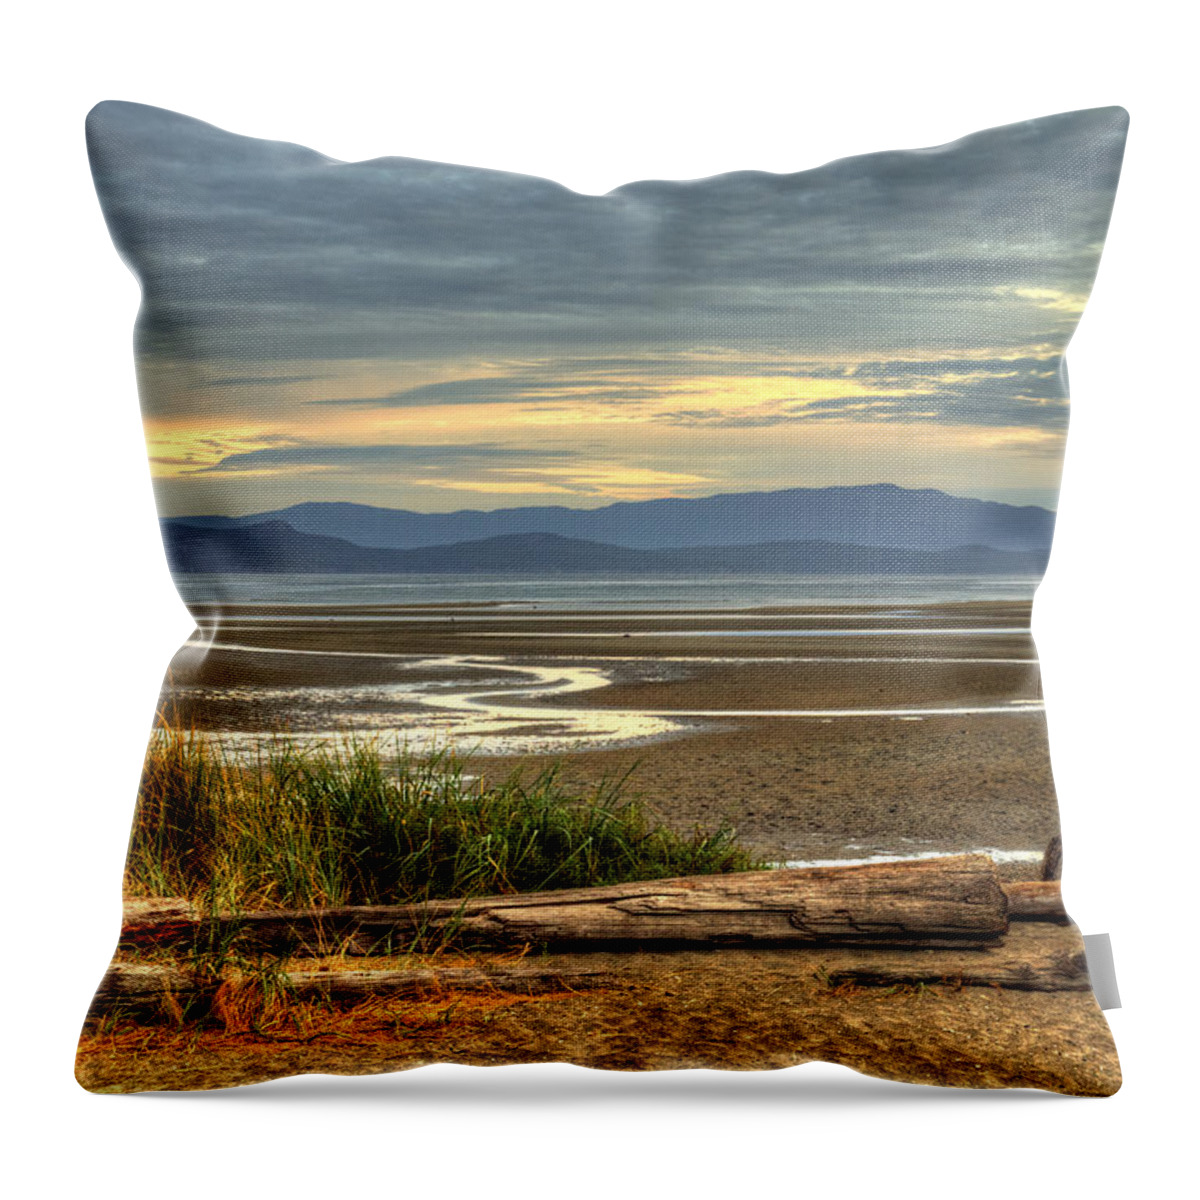 Landscape Throw Pillow featuring the photograph Low Tide by Randy Hall